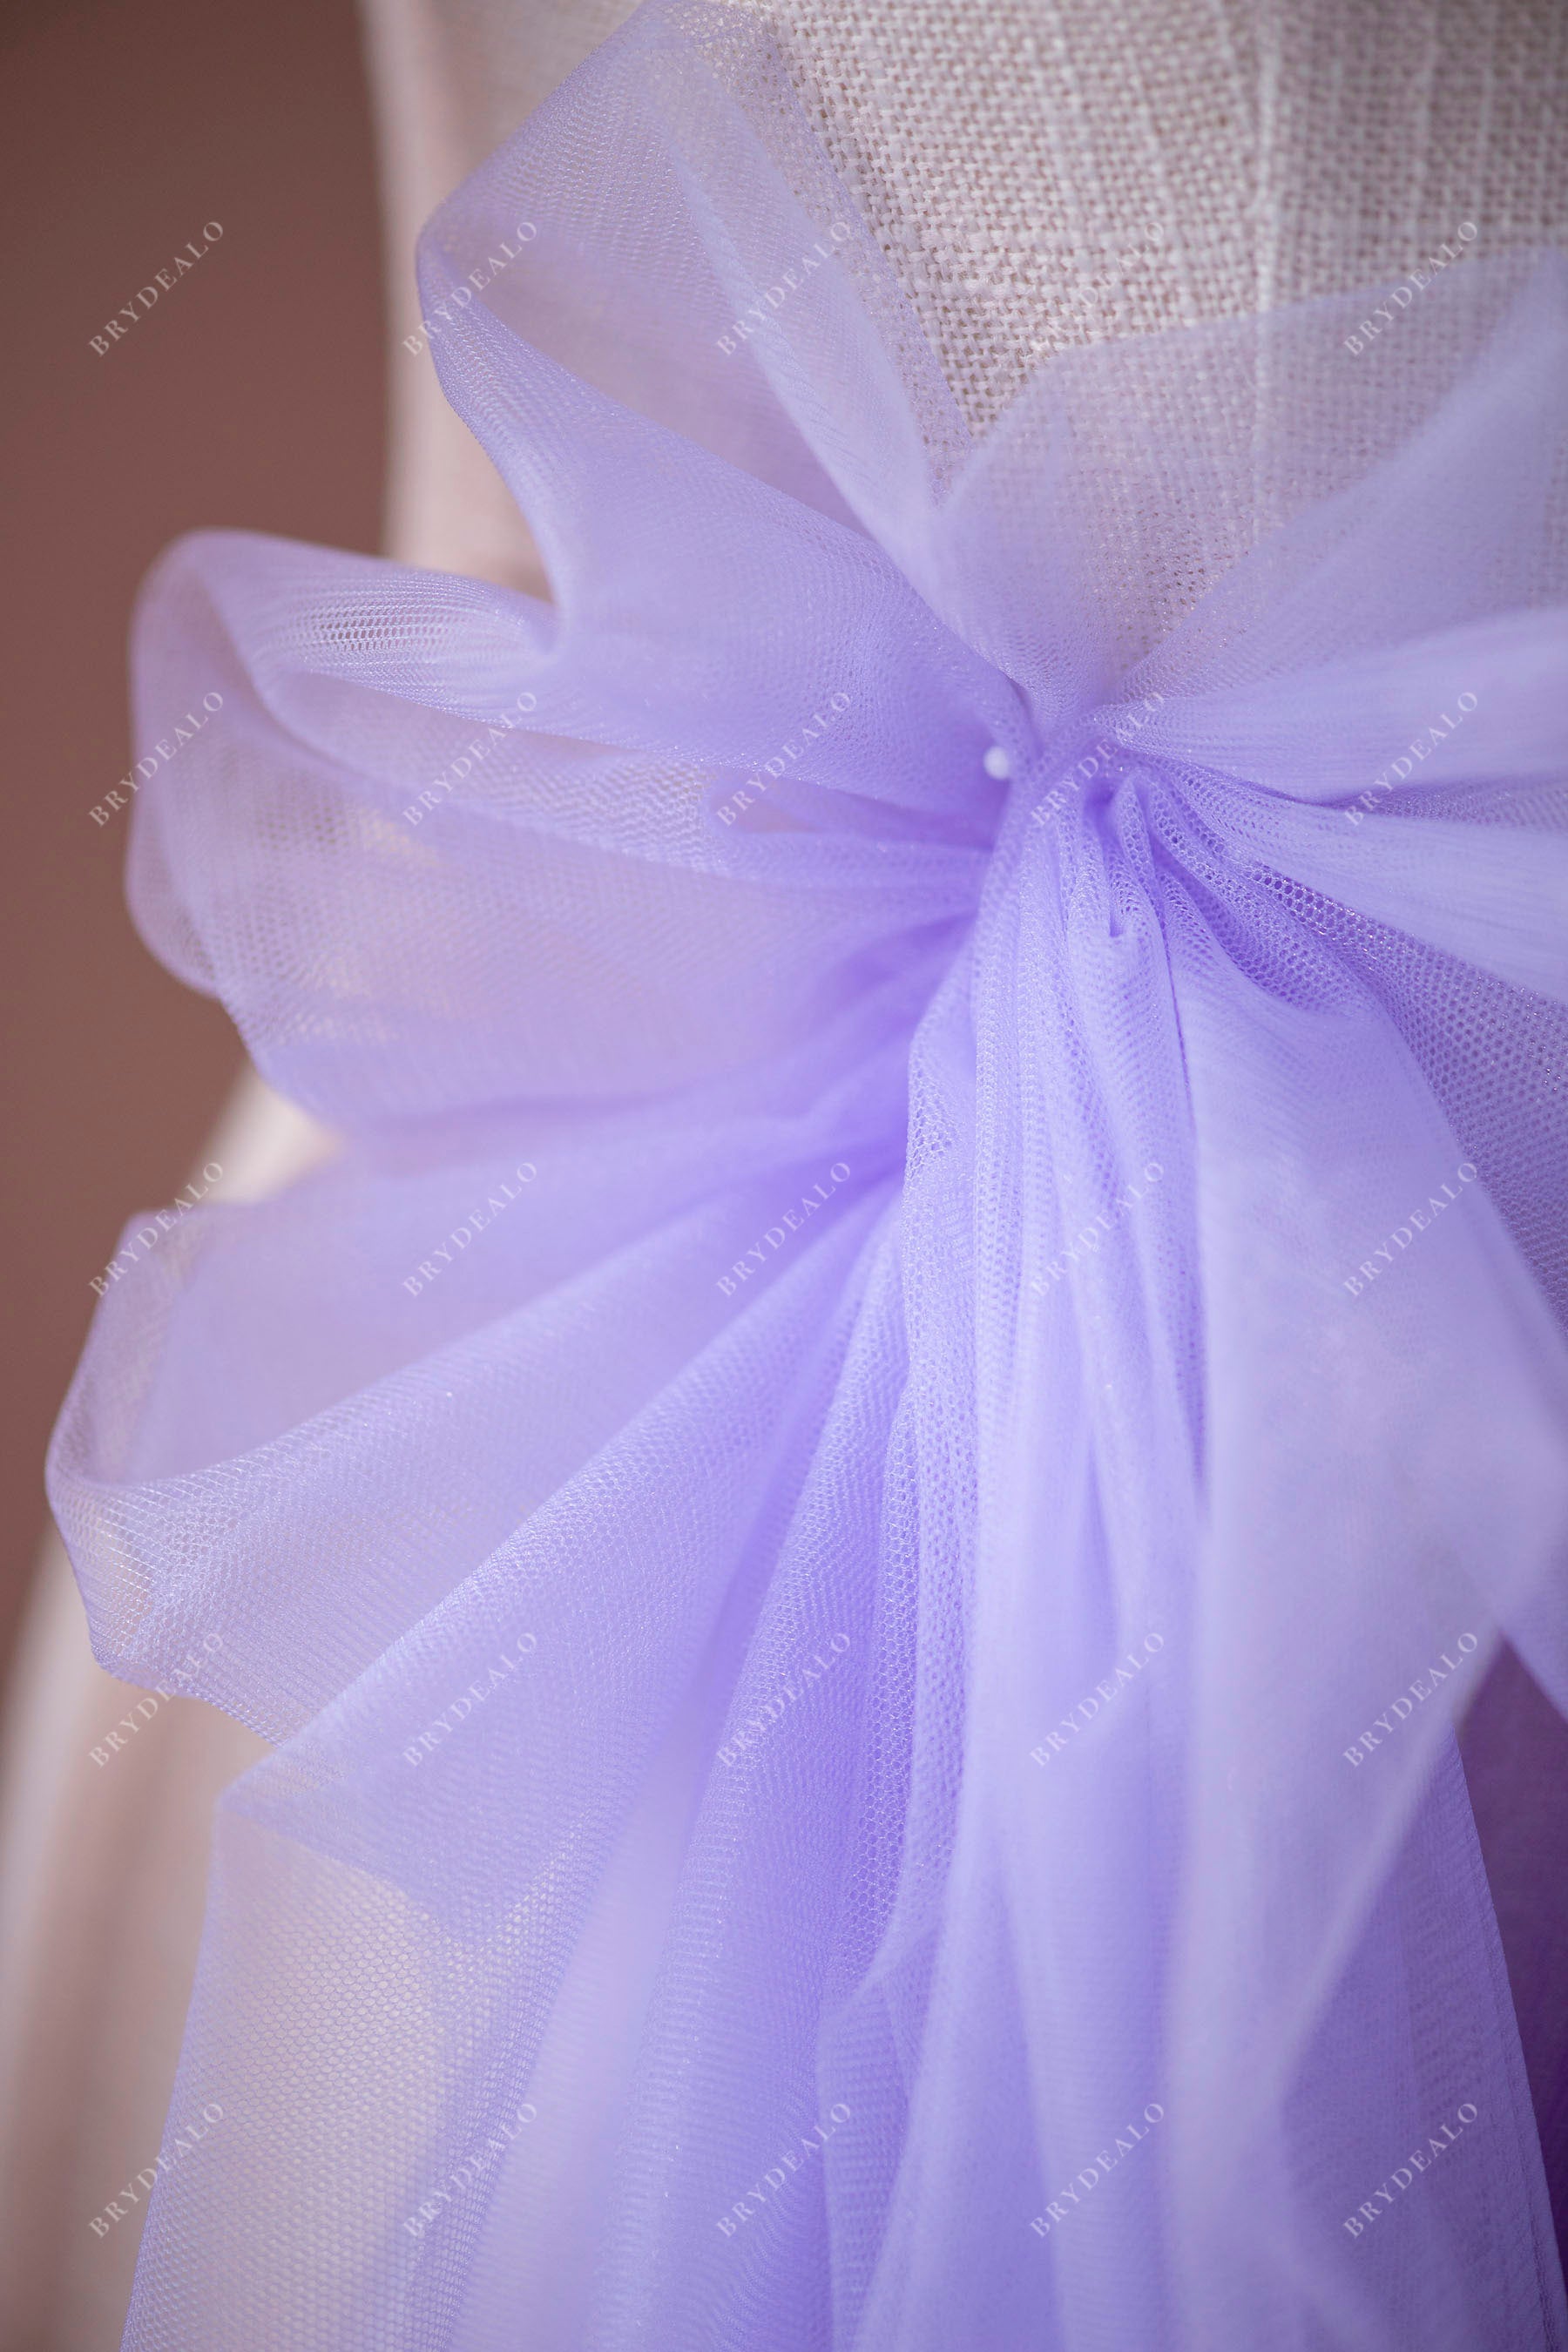 shimmery soft tulle fabric